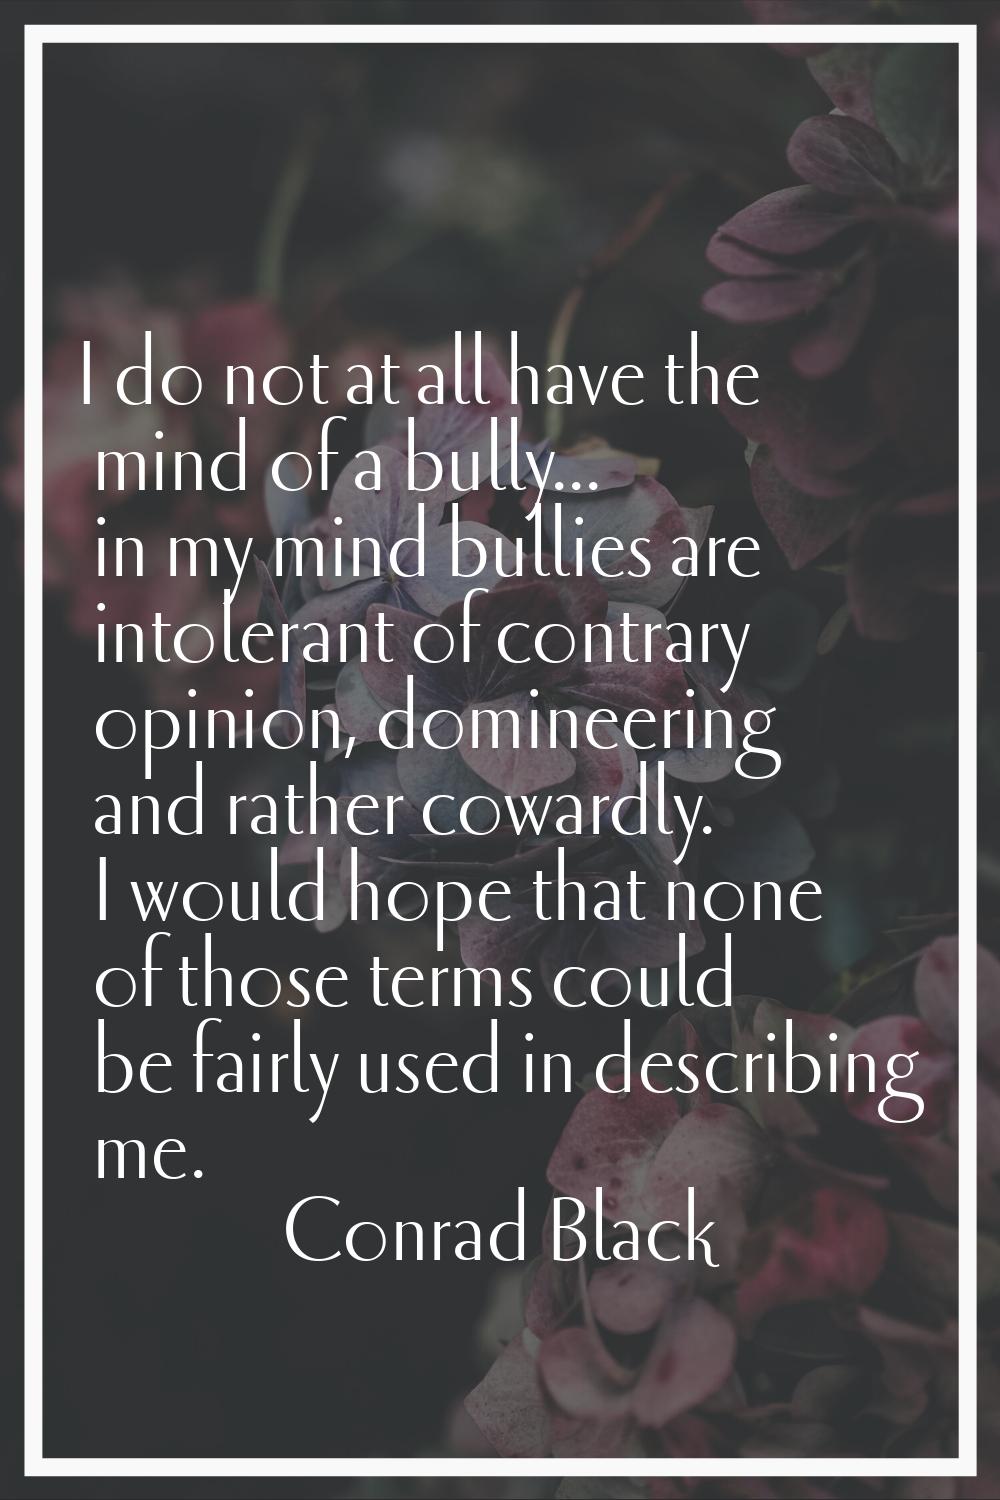 I do not at all have the mind of a bully... in my mind bullies are intolerant of contrary opinion, 